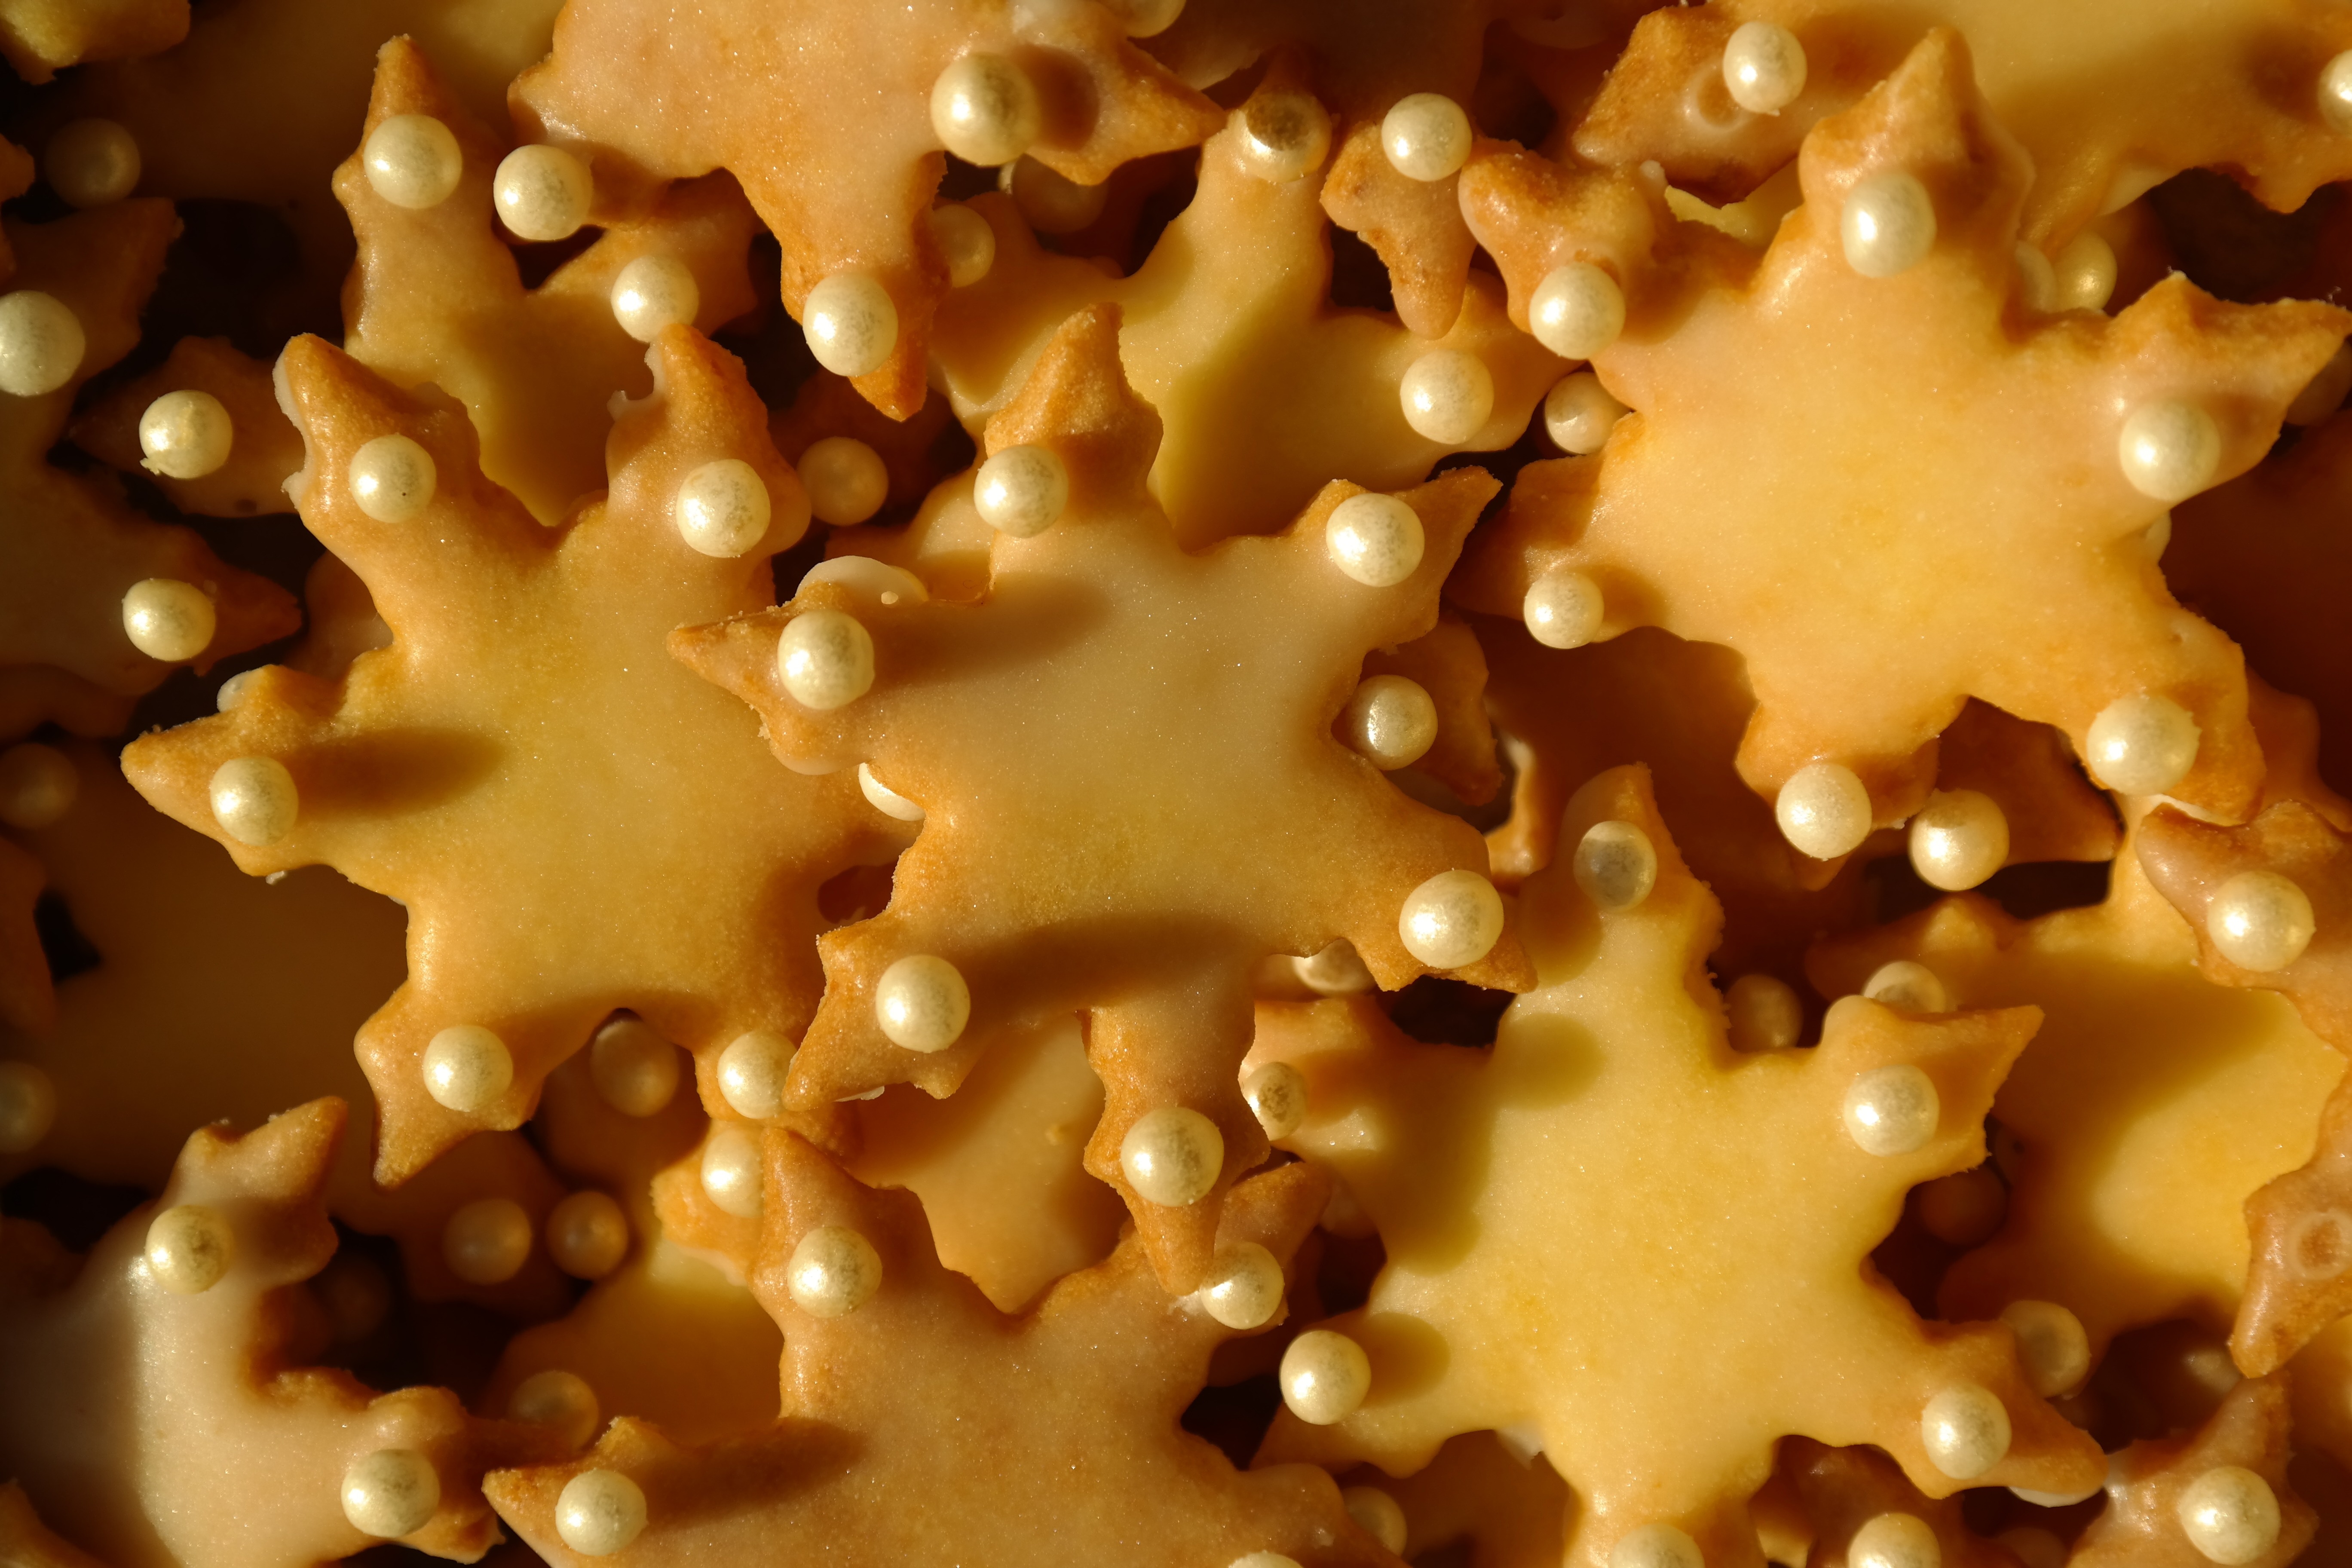 Cookie, Asterisk, Bake, Christmas Time, food and drink, gold colored